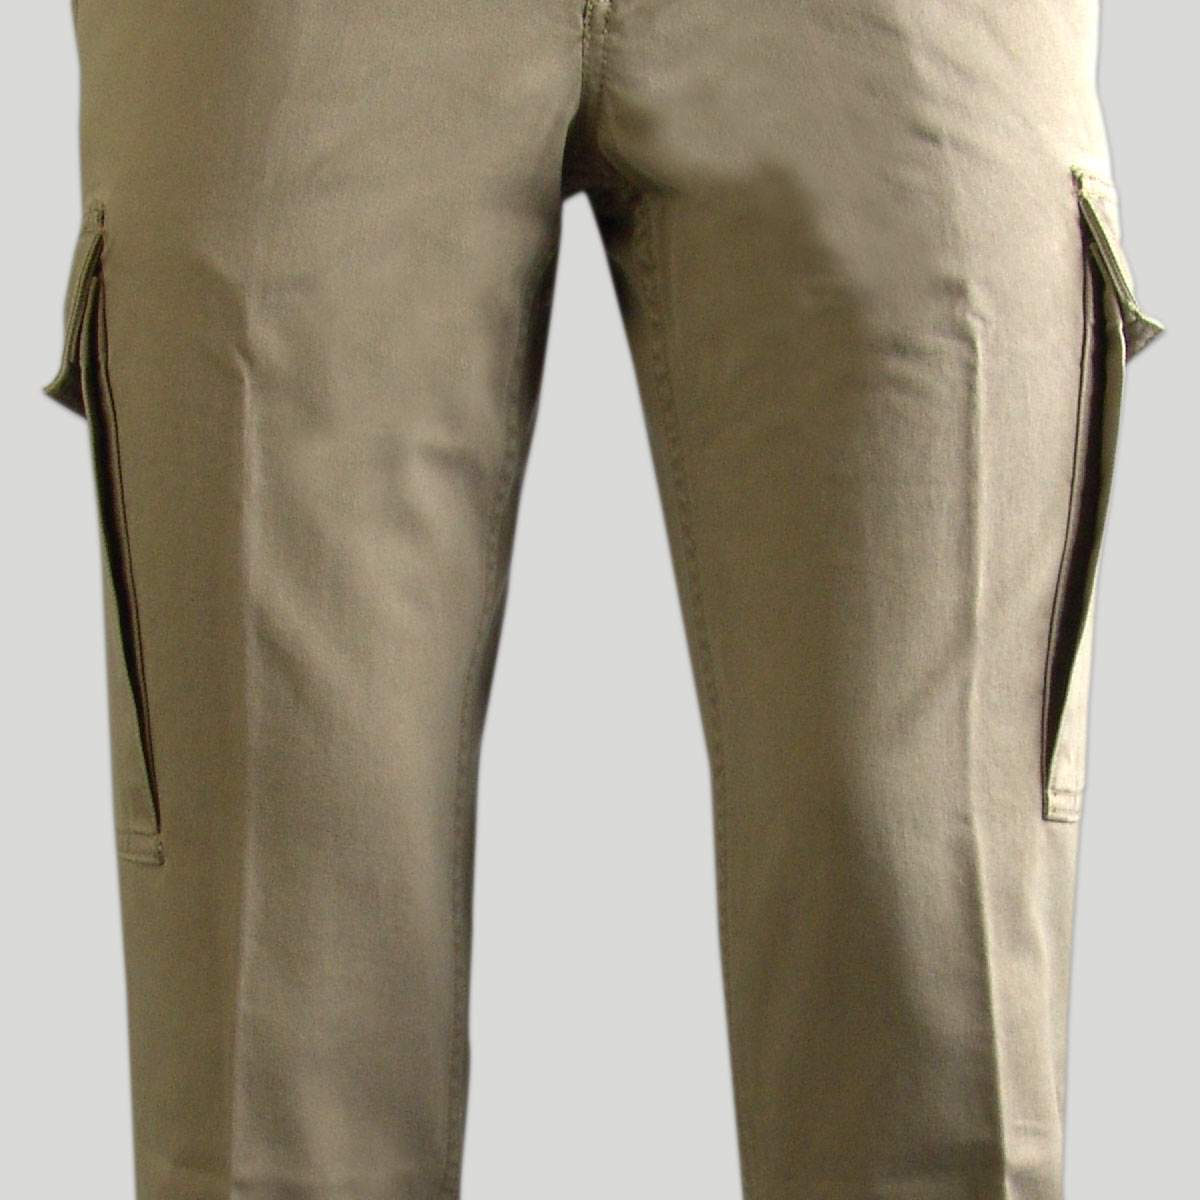 Cargo Pants for Man